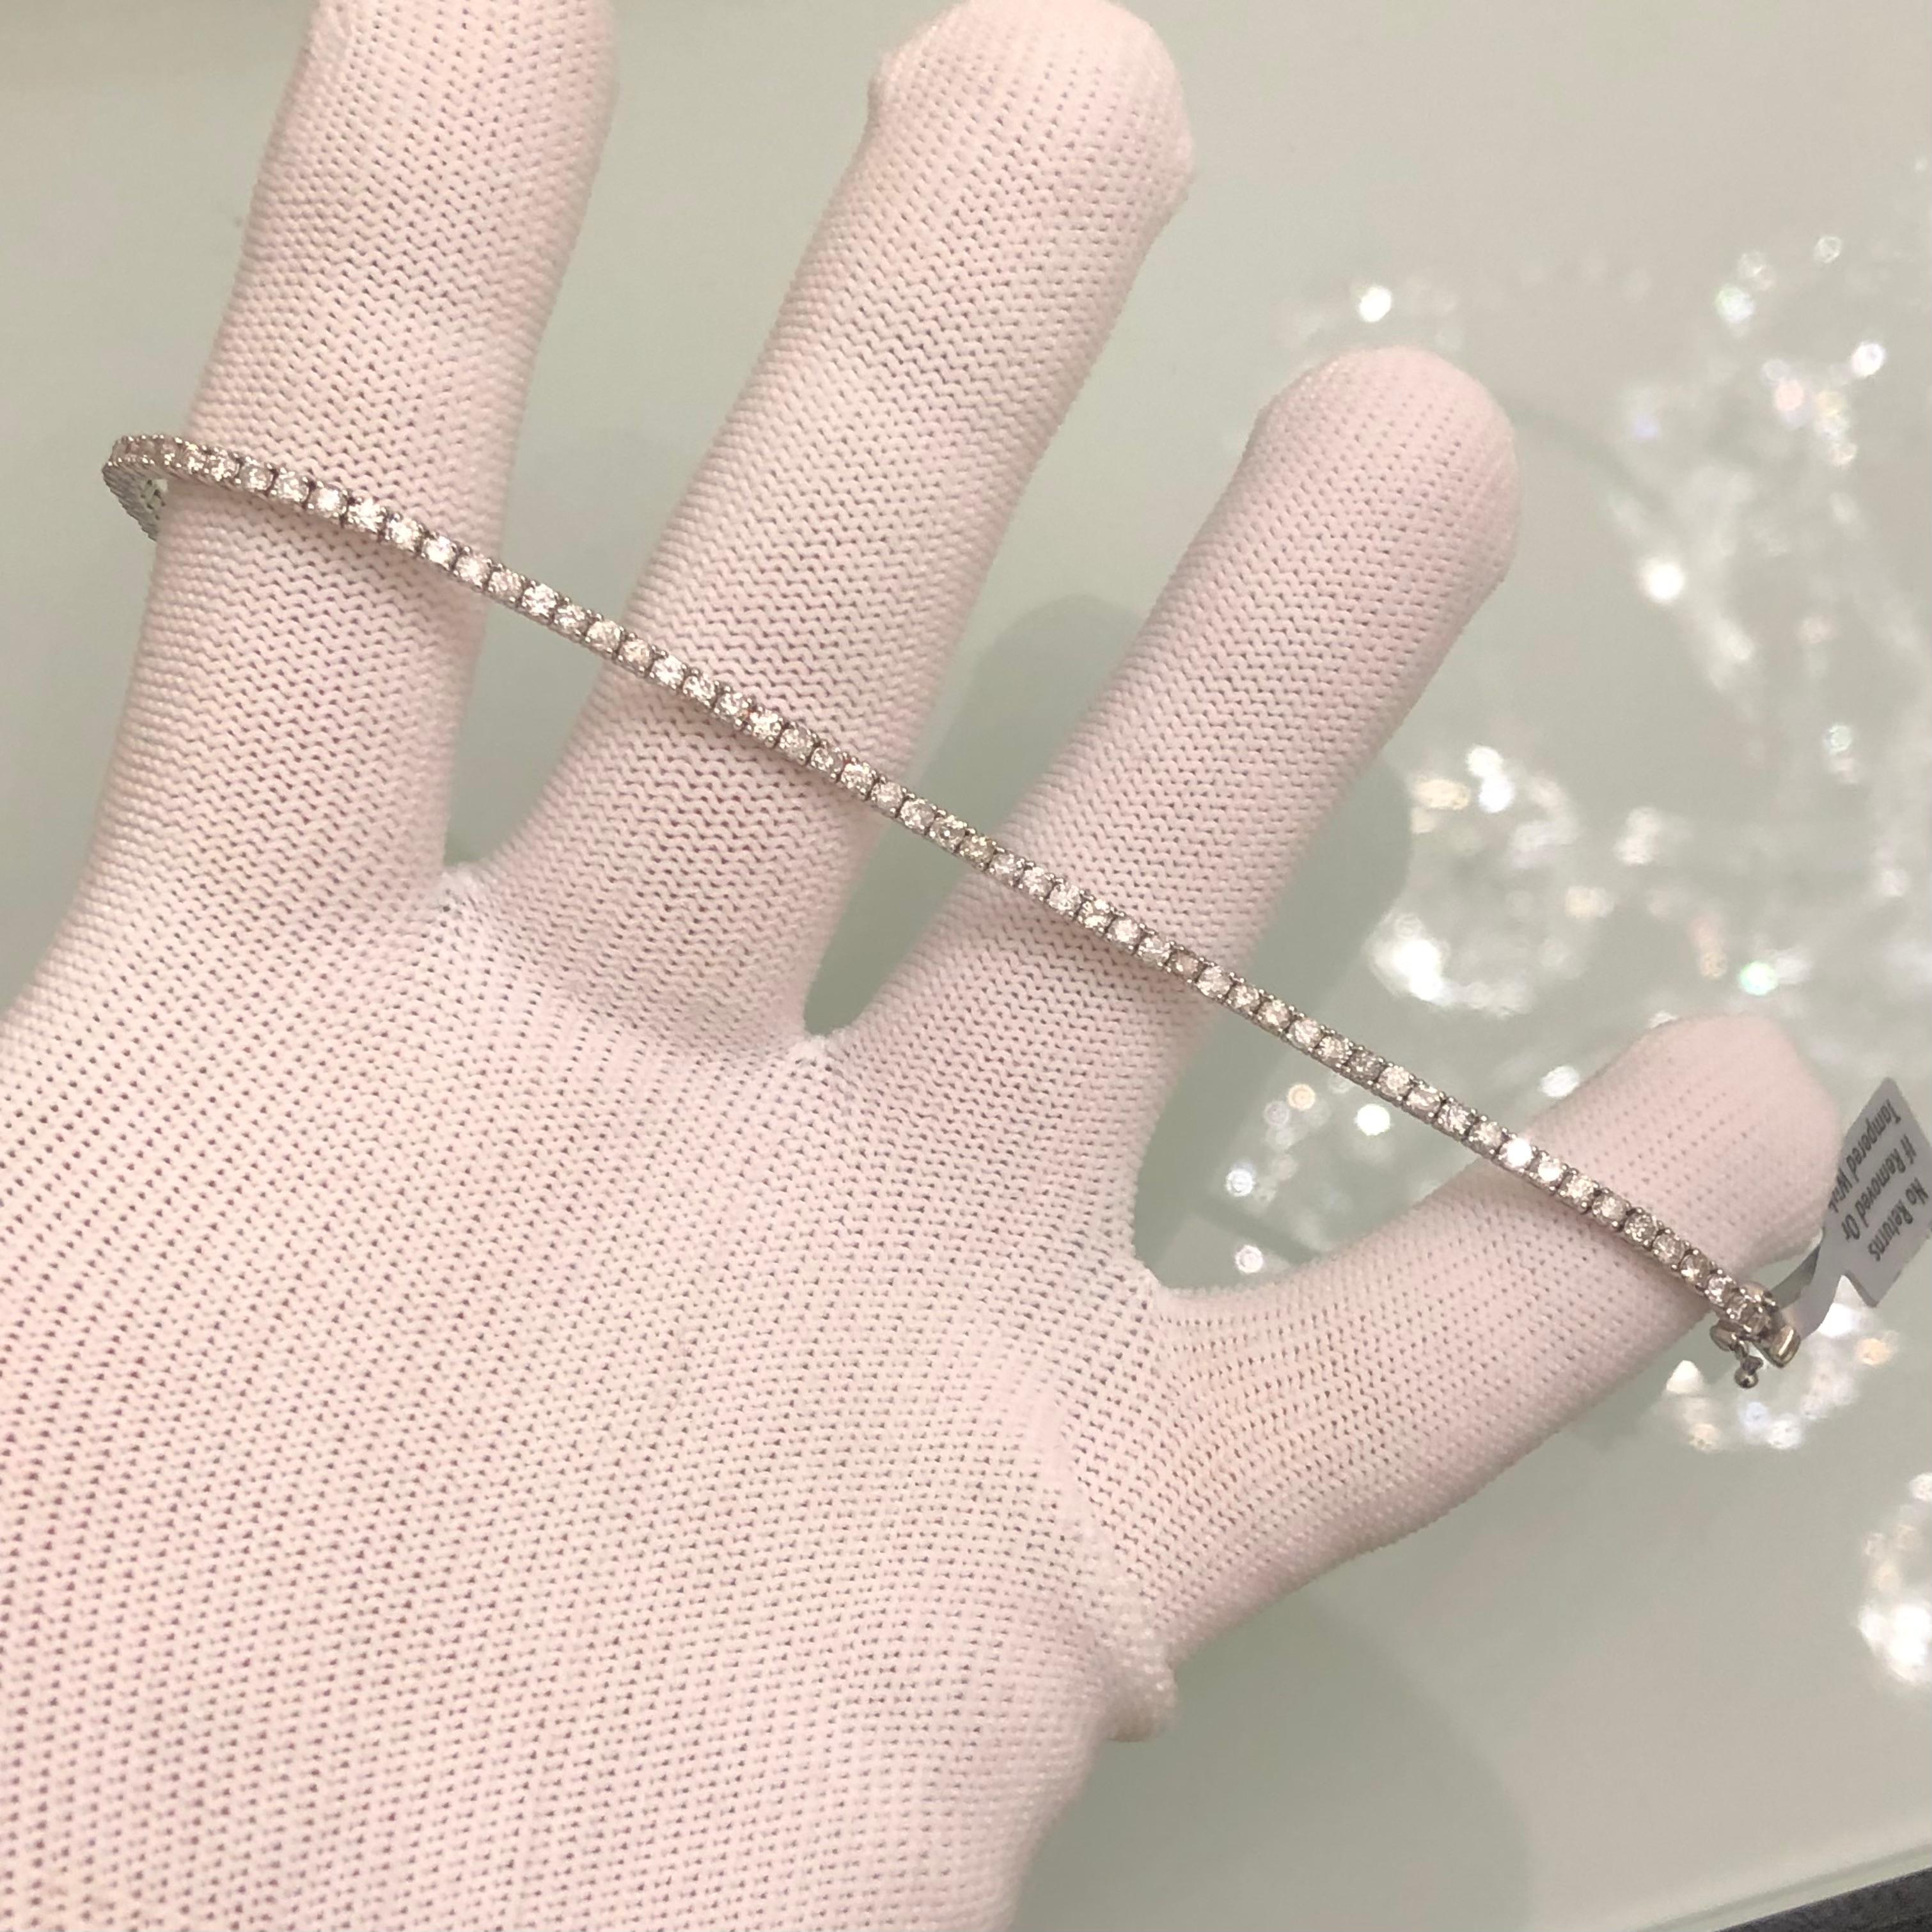 Classic 3 carat round natural diamond tennis link bracelet in 14k white gold. 76 round brilliant natural diamonds (SI-I clarity, natural earth-mined) are hand set in this diamond tennis bracelet weighing approx. 3 carats.


This approx. 3.00 carat